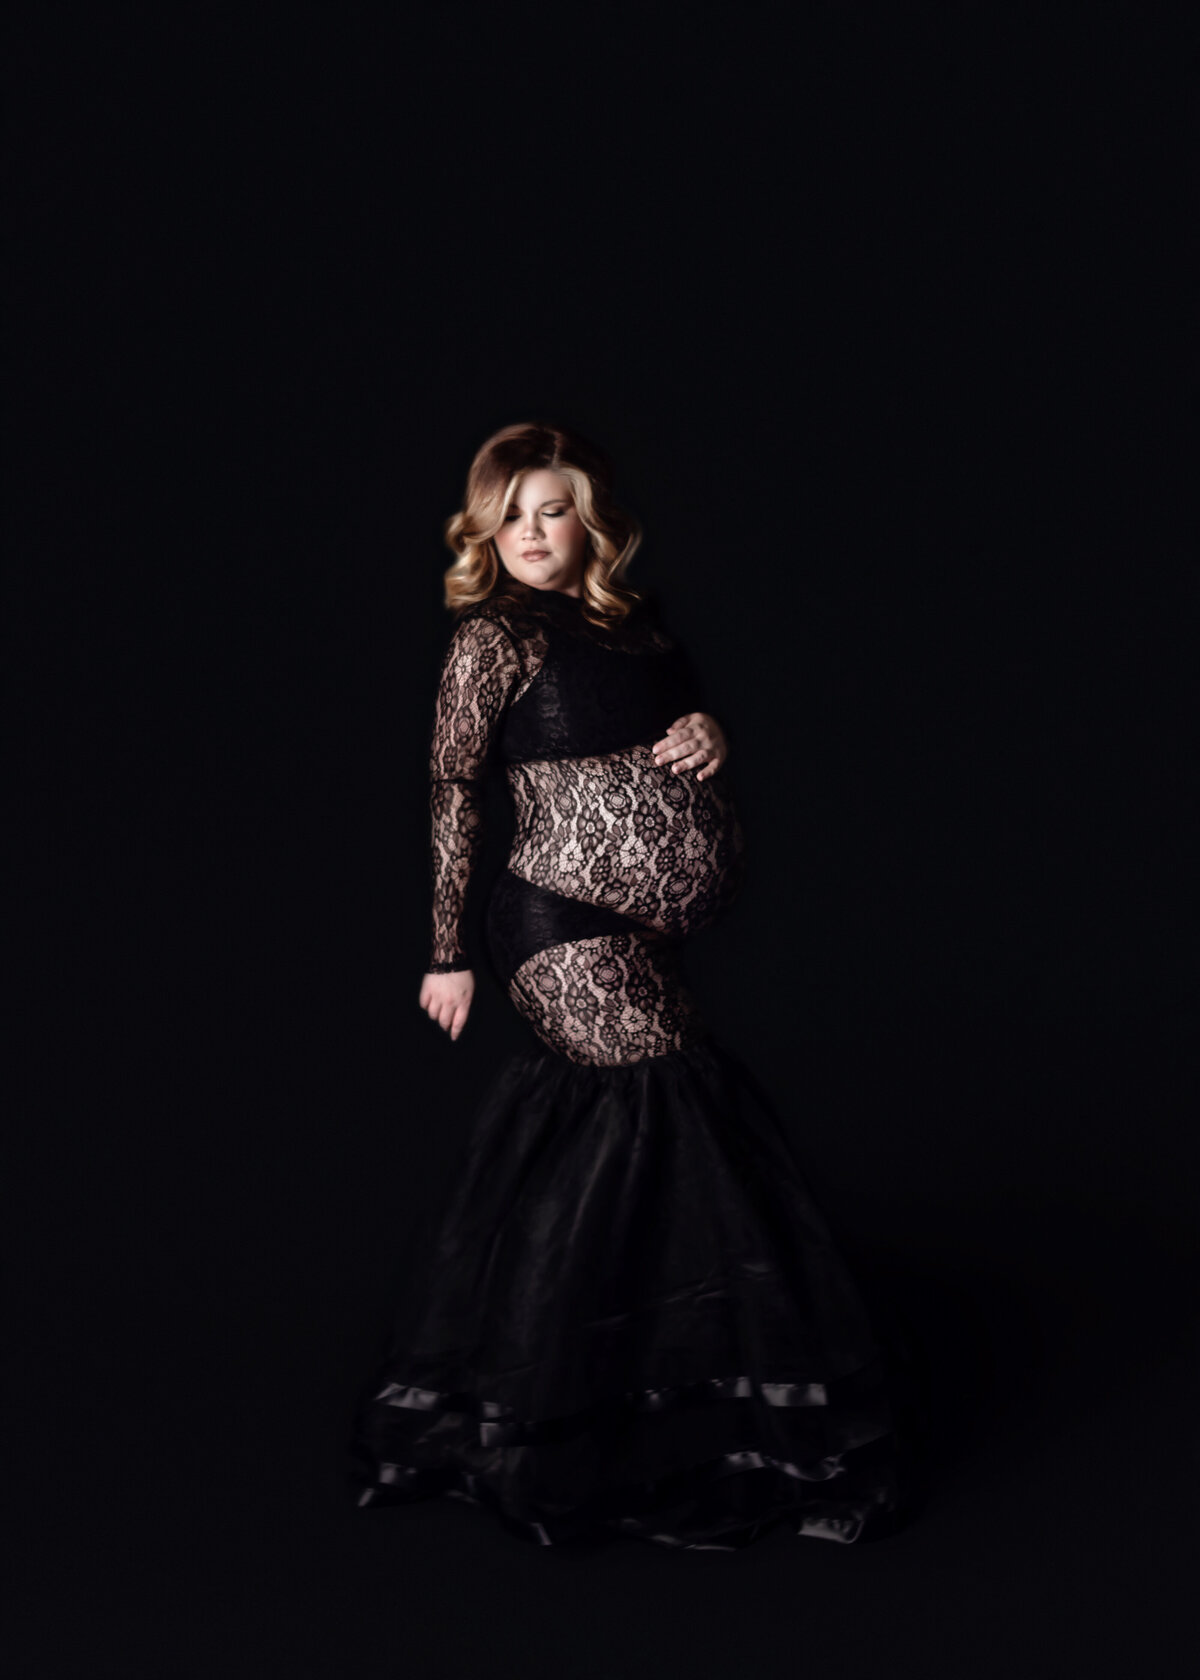 Women wearing black long gown with glam makeup during maternity photoshoot in Franklin Tennessee photography studio